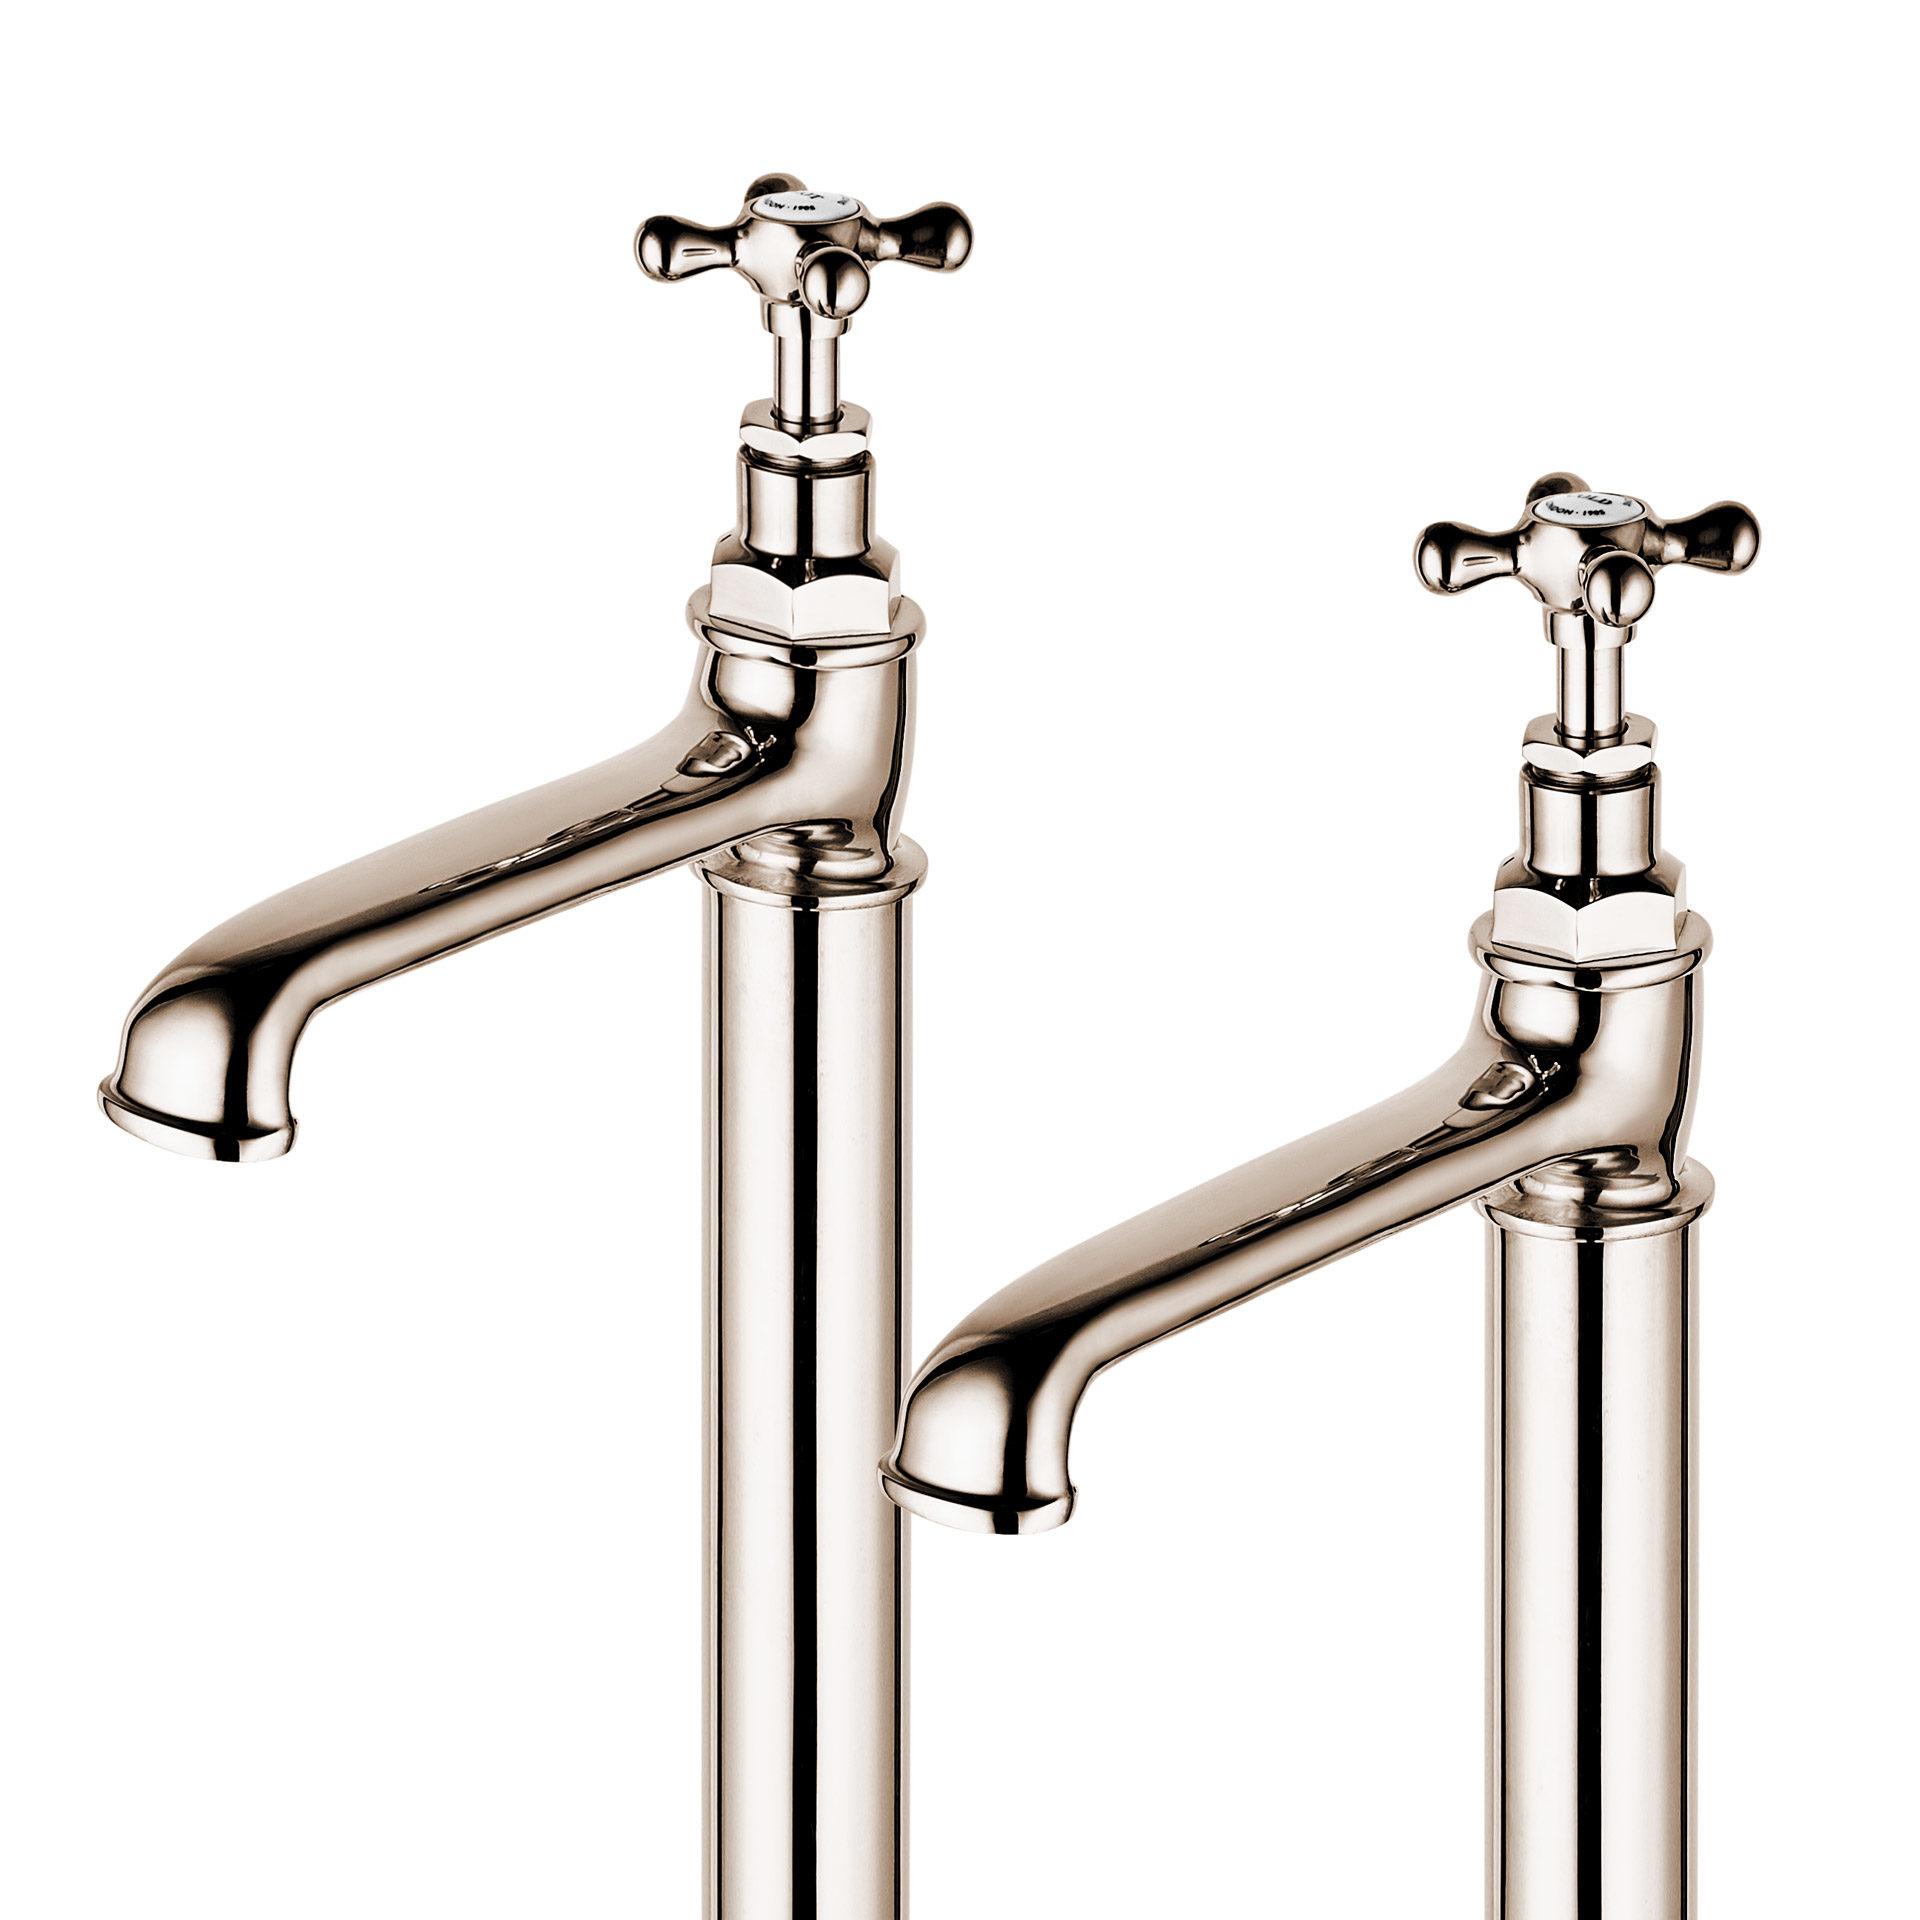 Detail of Floor Mounted Bath Taps in Polished Nickel